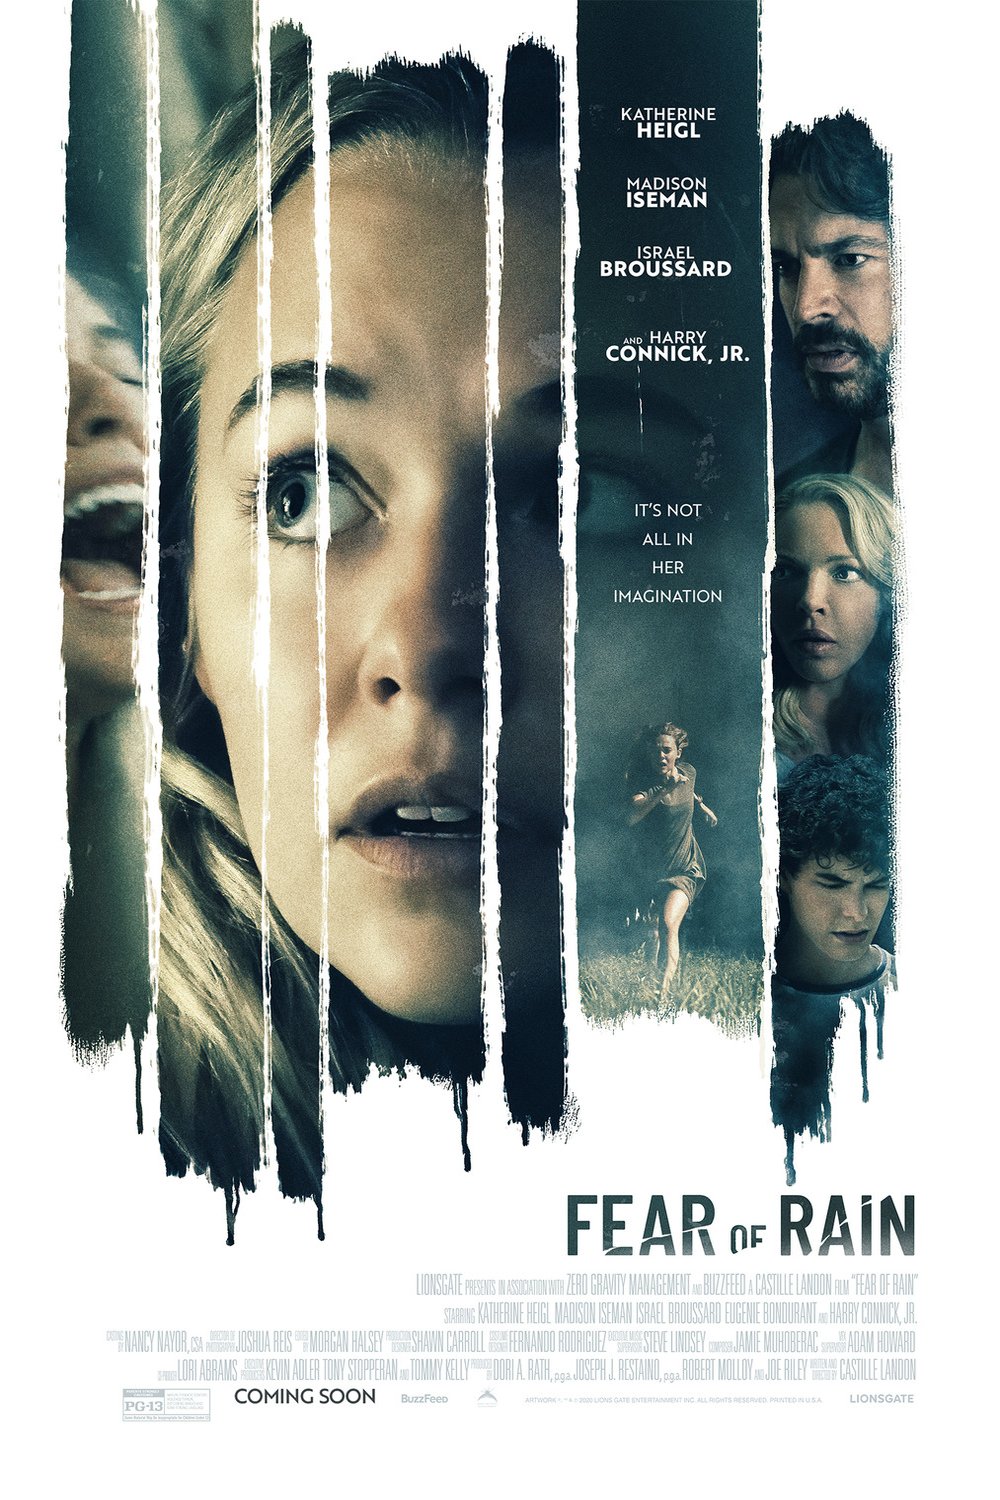 Poster of the movie Fear of Rain